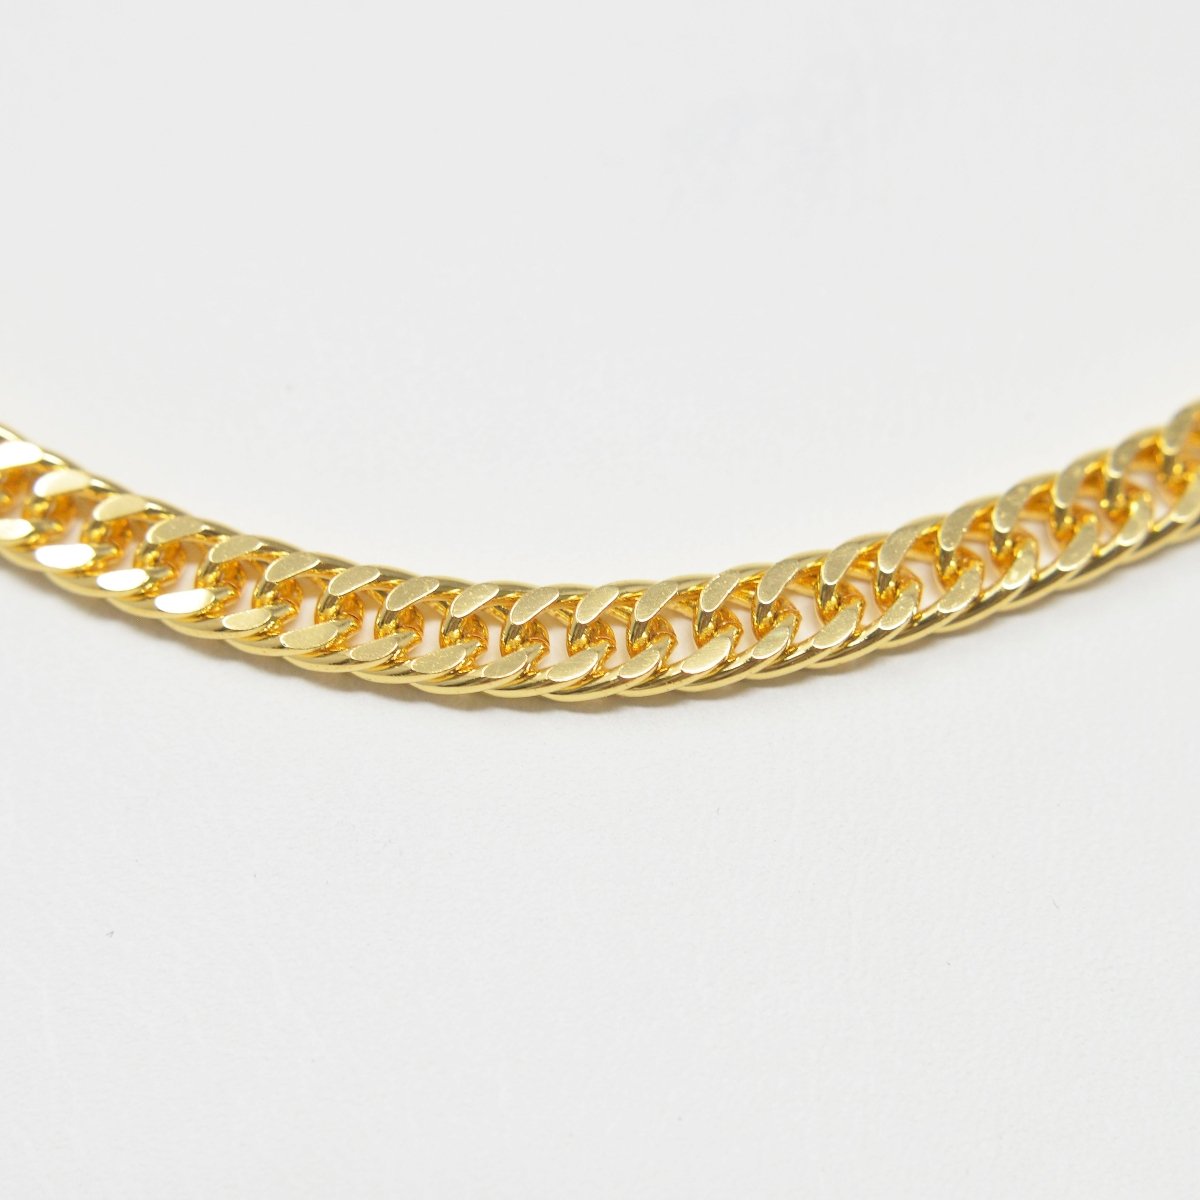 19.8 inch Curb Chain Necklace, 24K Gold Plated Curb Finished Necklace For Jewelry Making, 4mm Curb Necklace w/ Lobster Clasps | CN-993 Clearance Pricing - DLUXCA